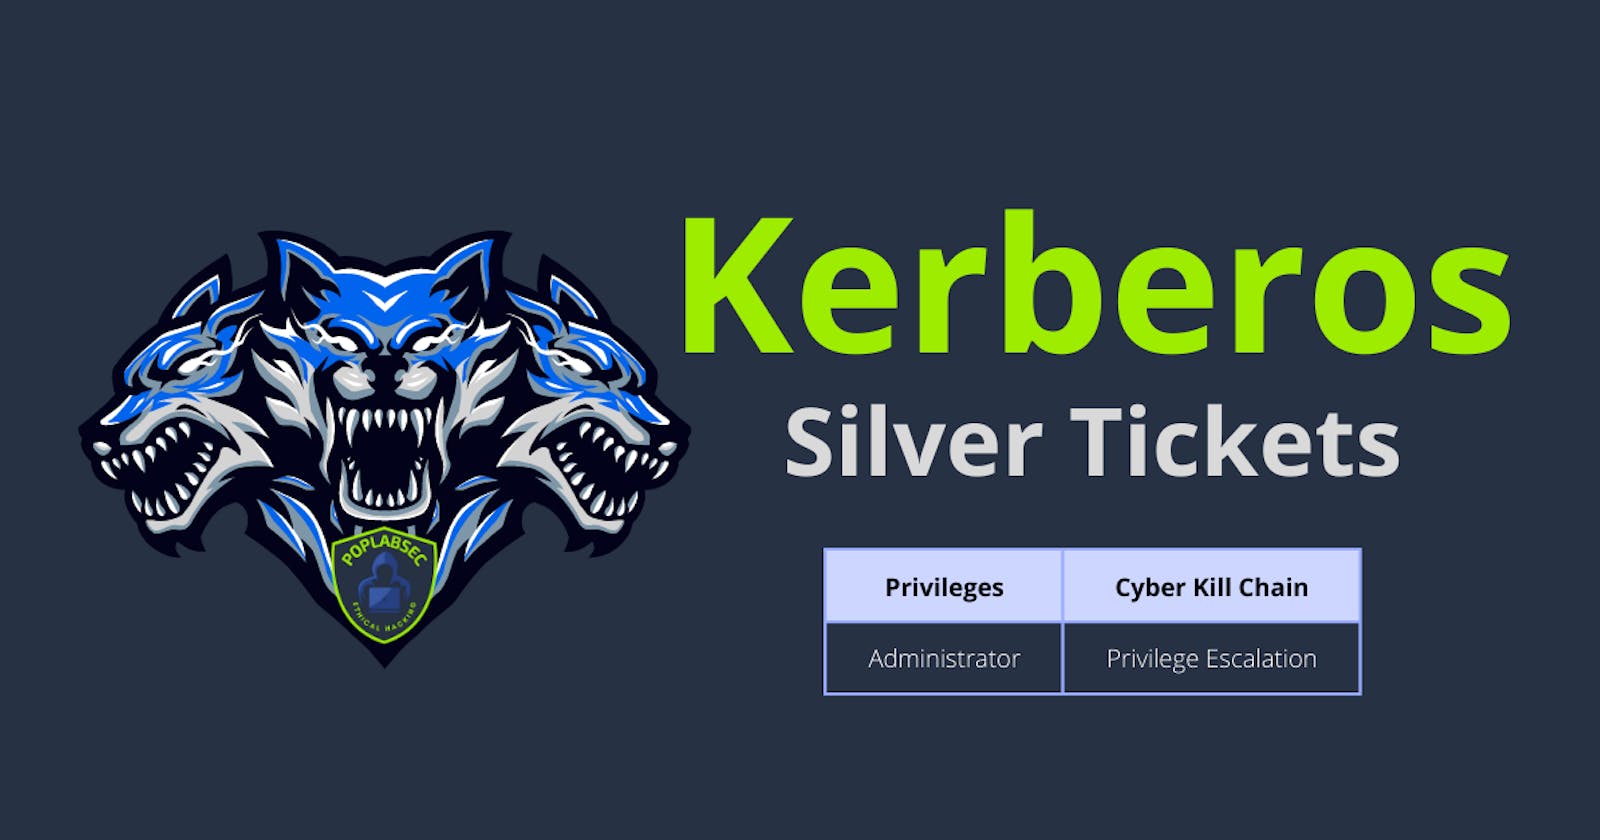 Kerberos Silver Ticket Attack Explained (Theory)